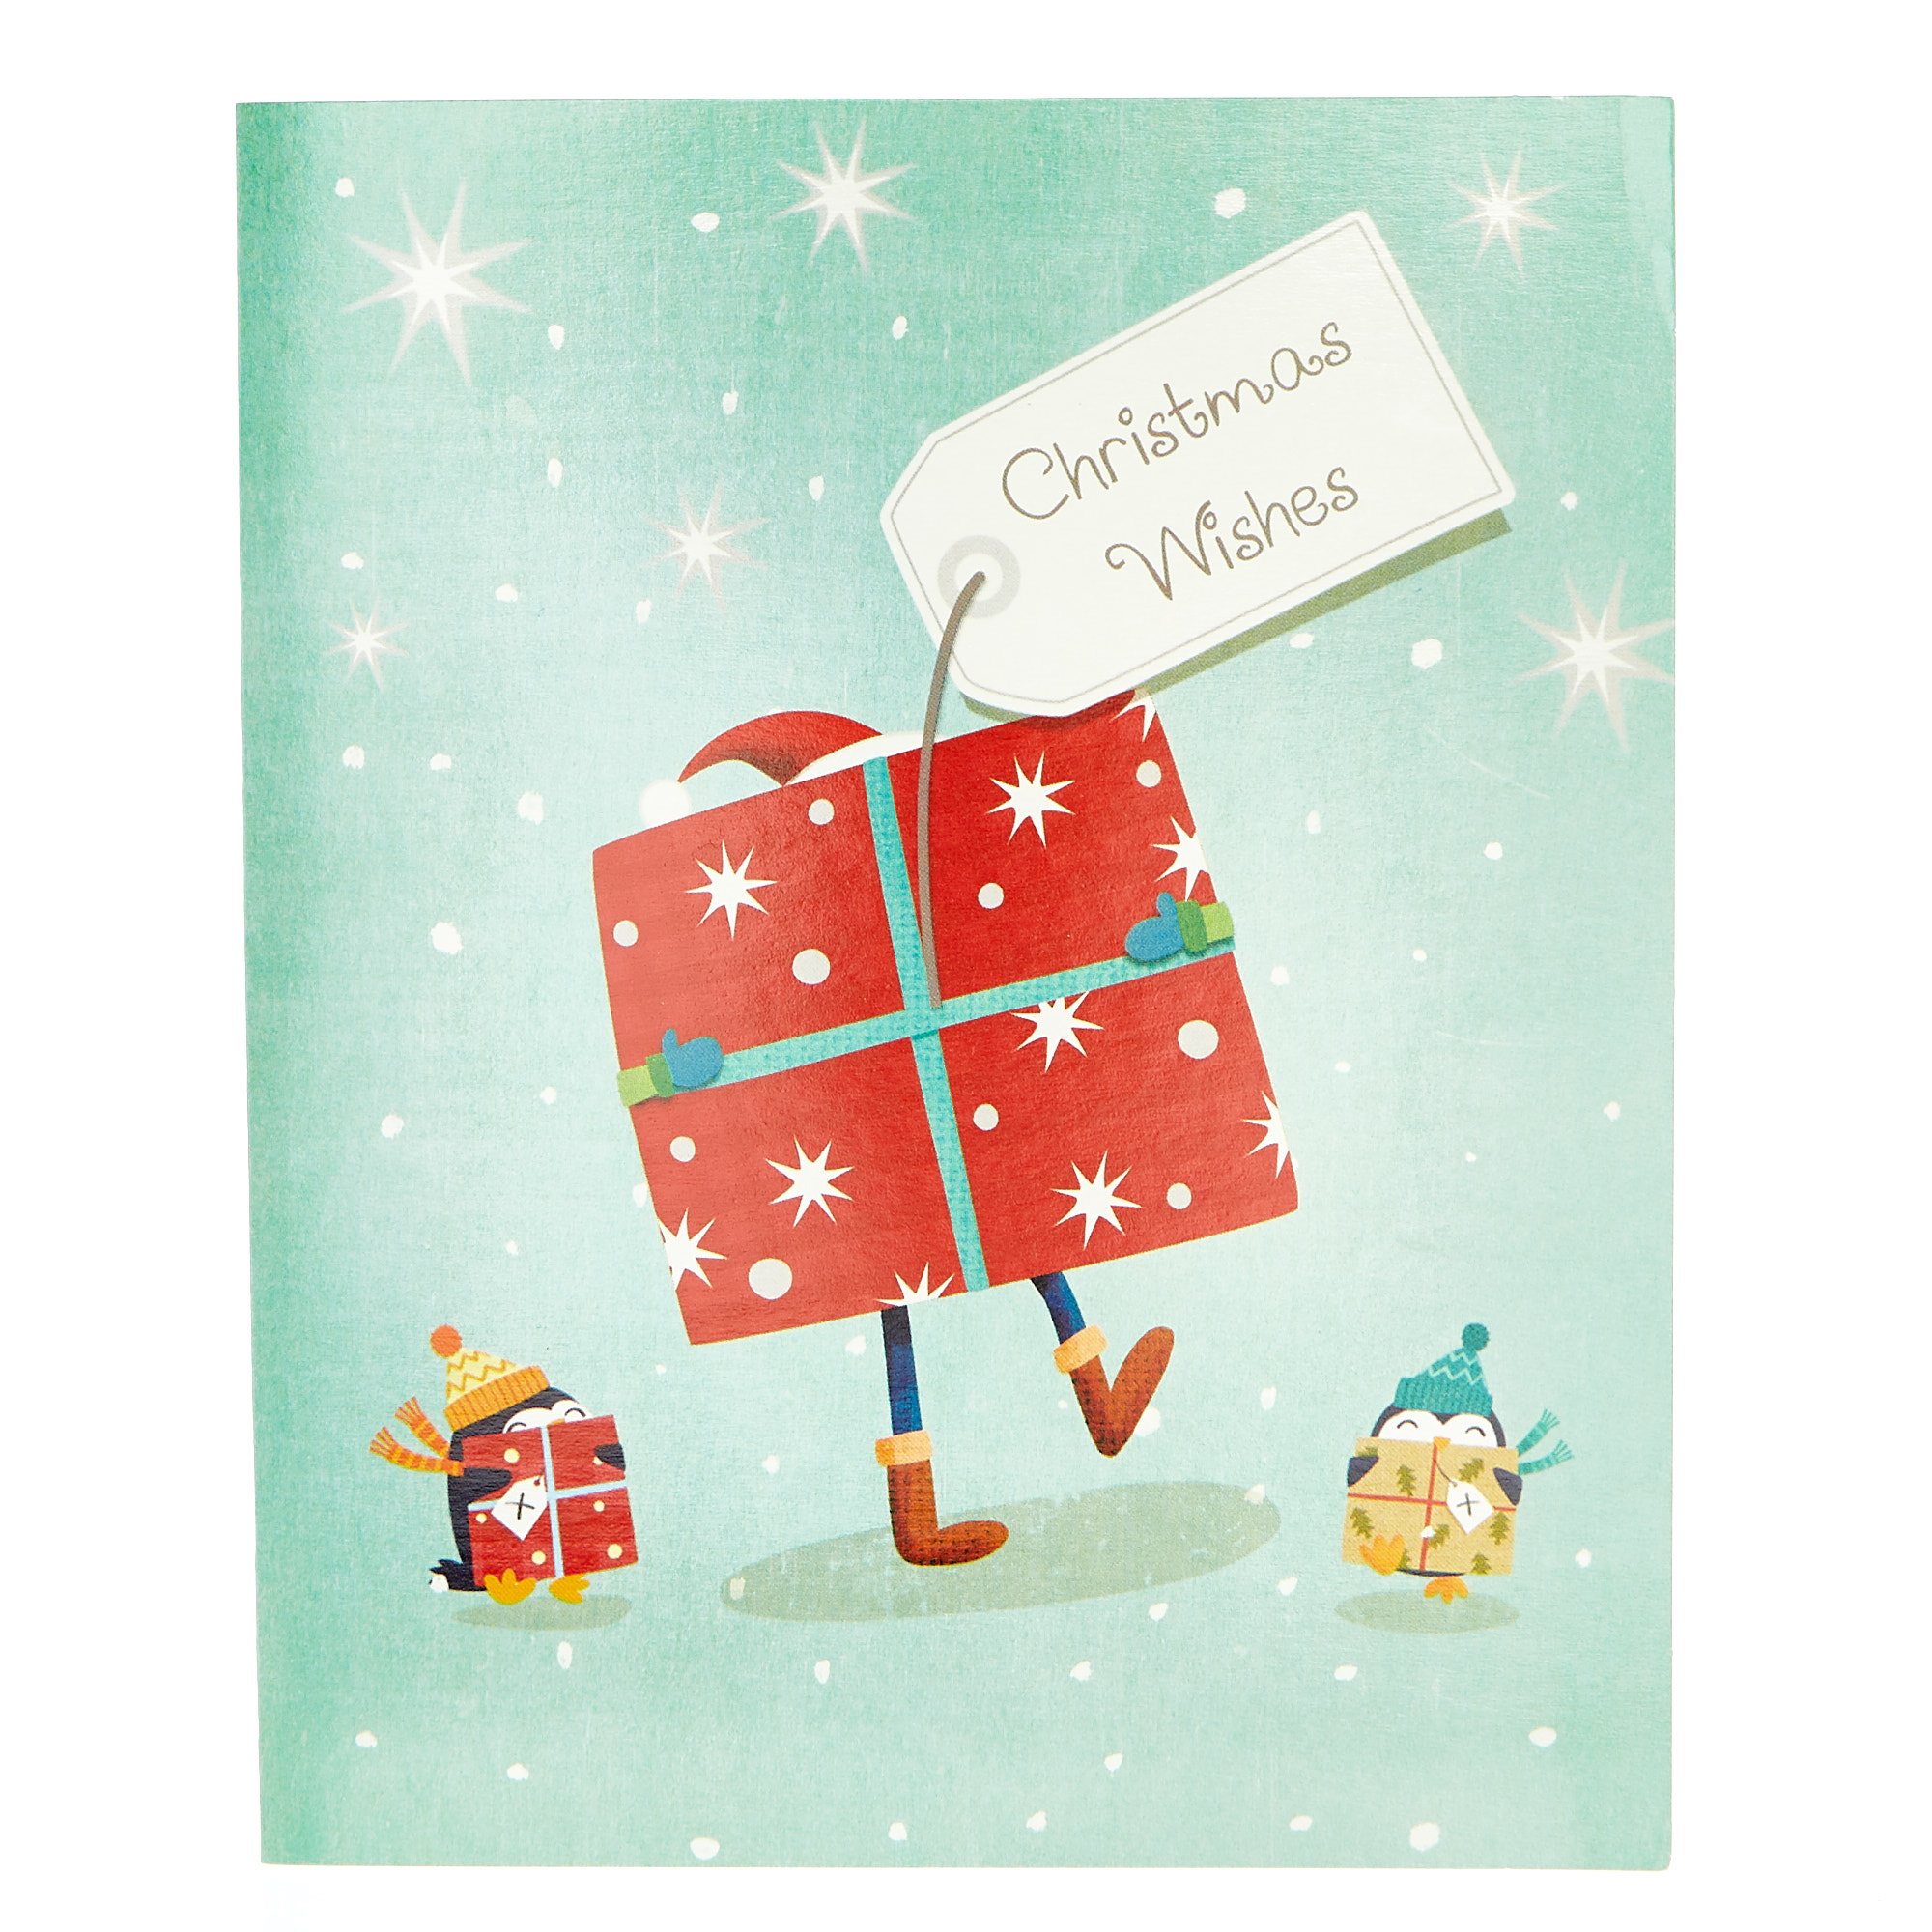 Pack Of 30 Children's Christmas Cards - 5 Designs